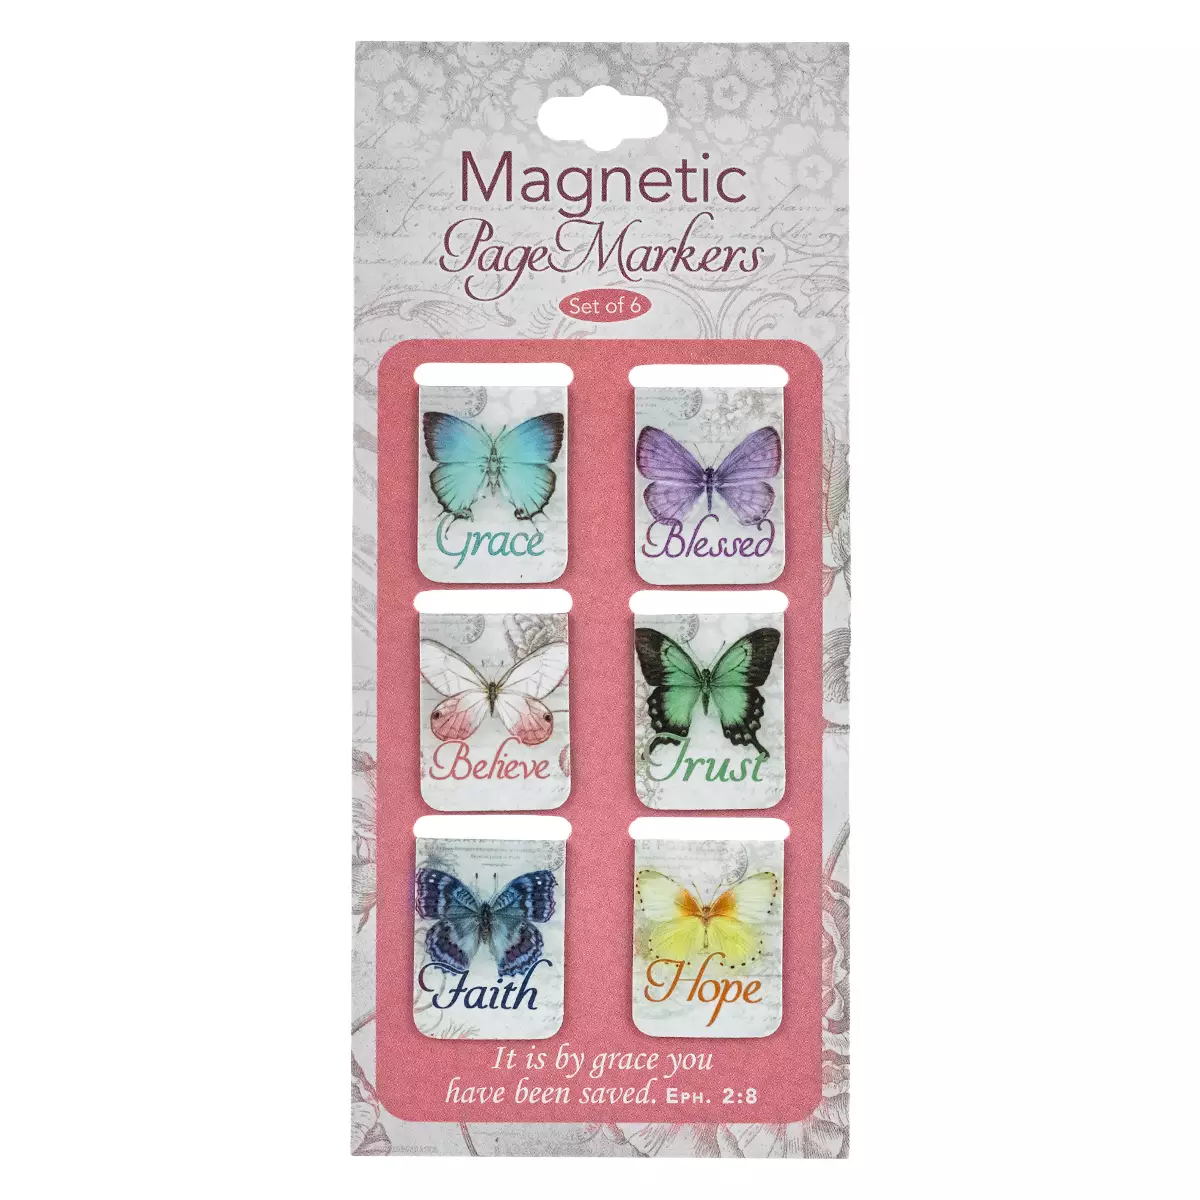 Magnetic Page Markers Everyday Blessings Pink Set Of 6